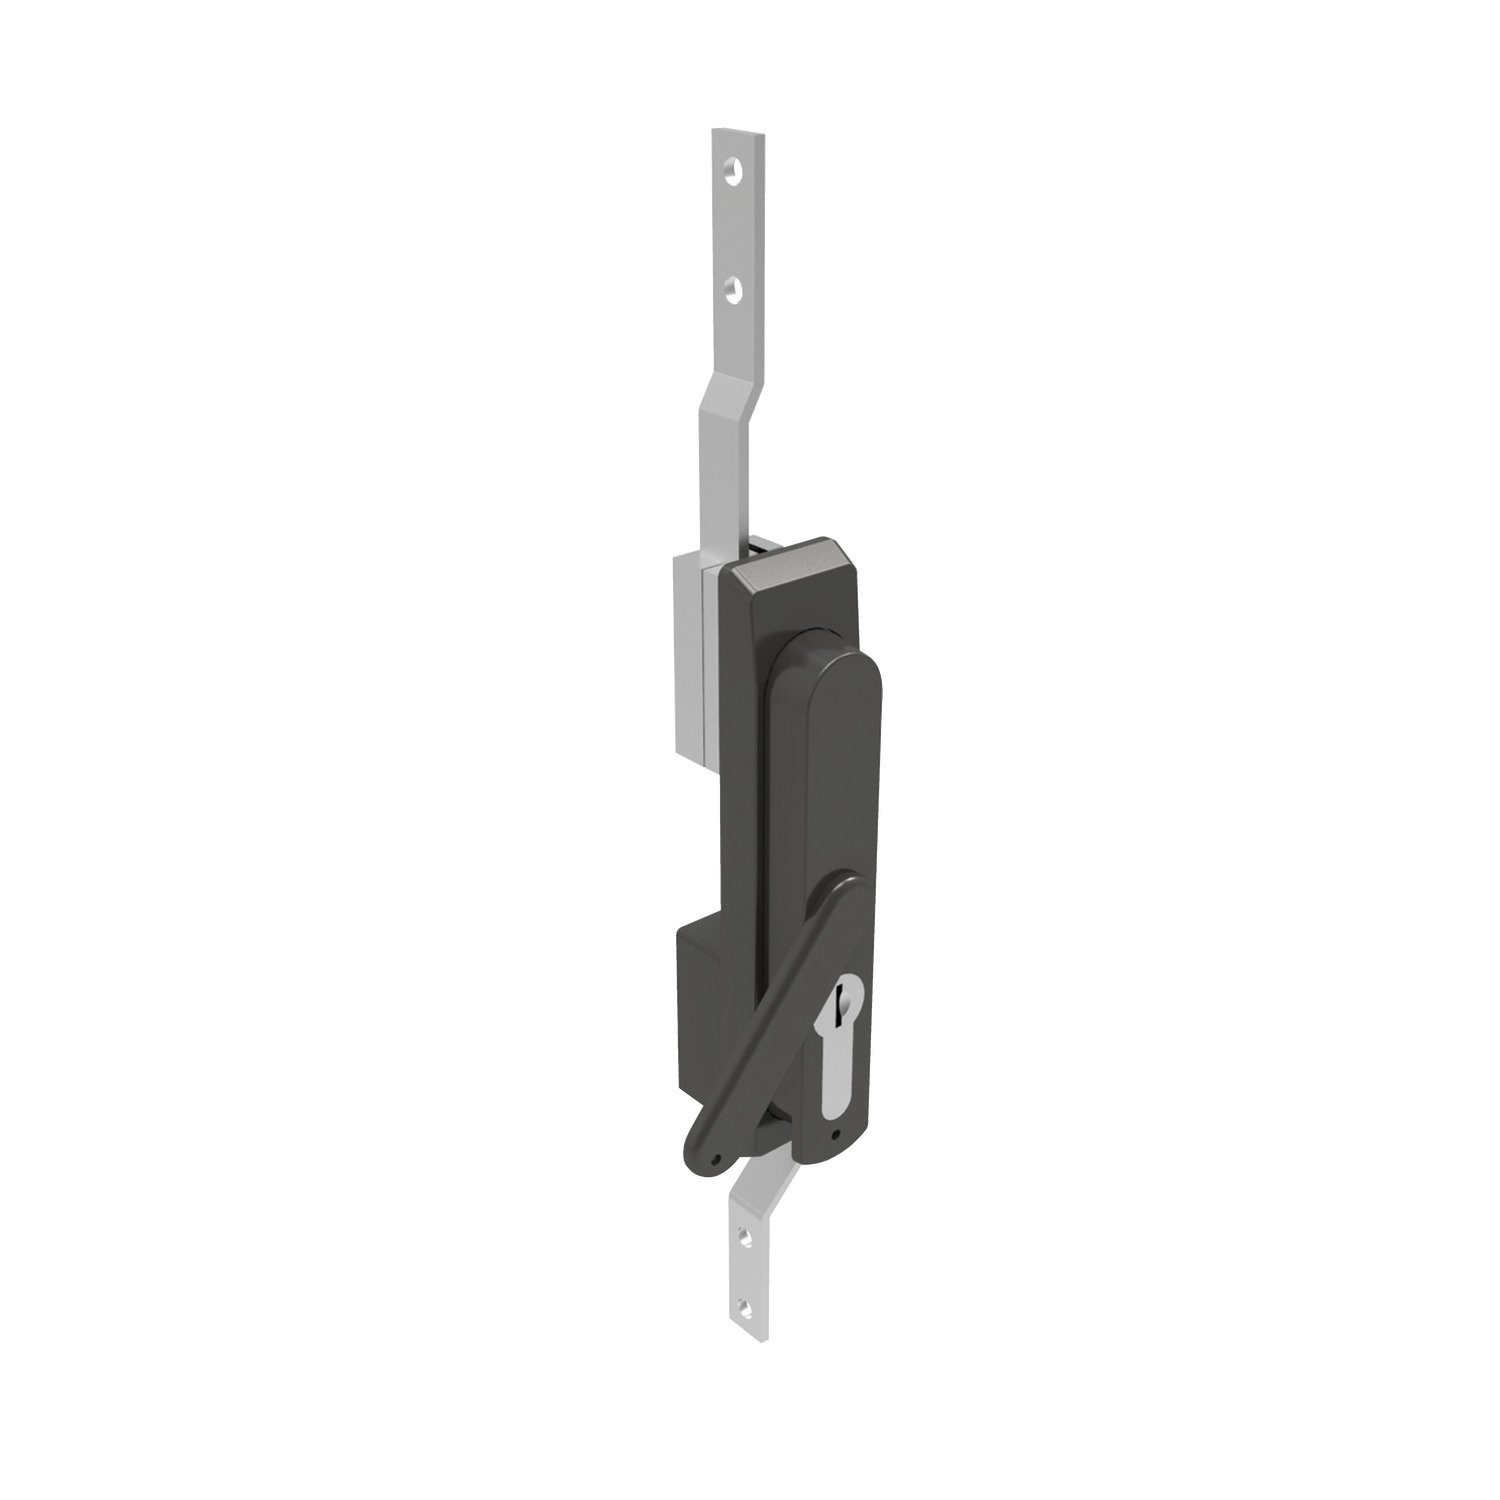 Product B2082, Swing Handles - with Rod Control 40mm euro cylinder lock - dust cover - zinc or polyamide / 